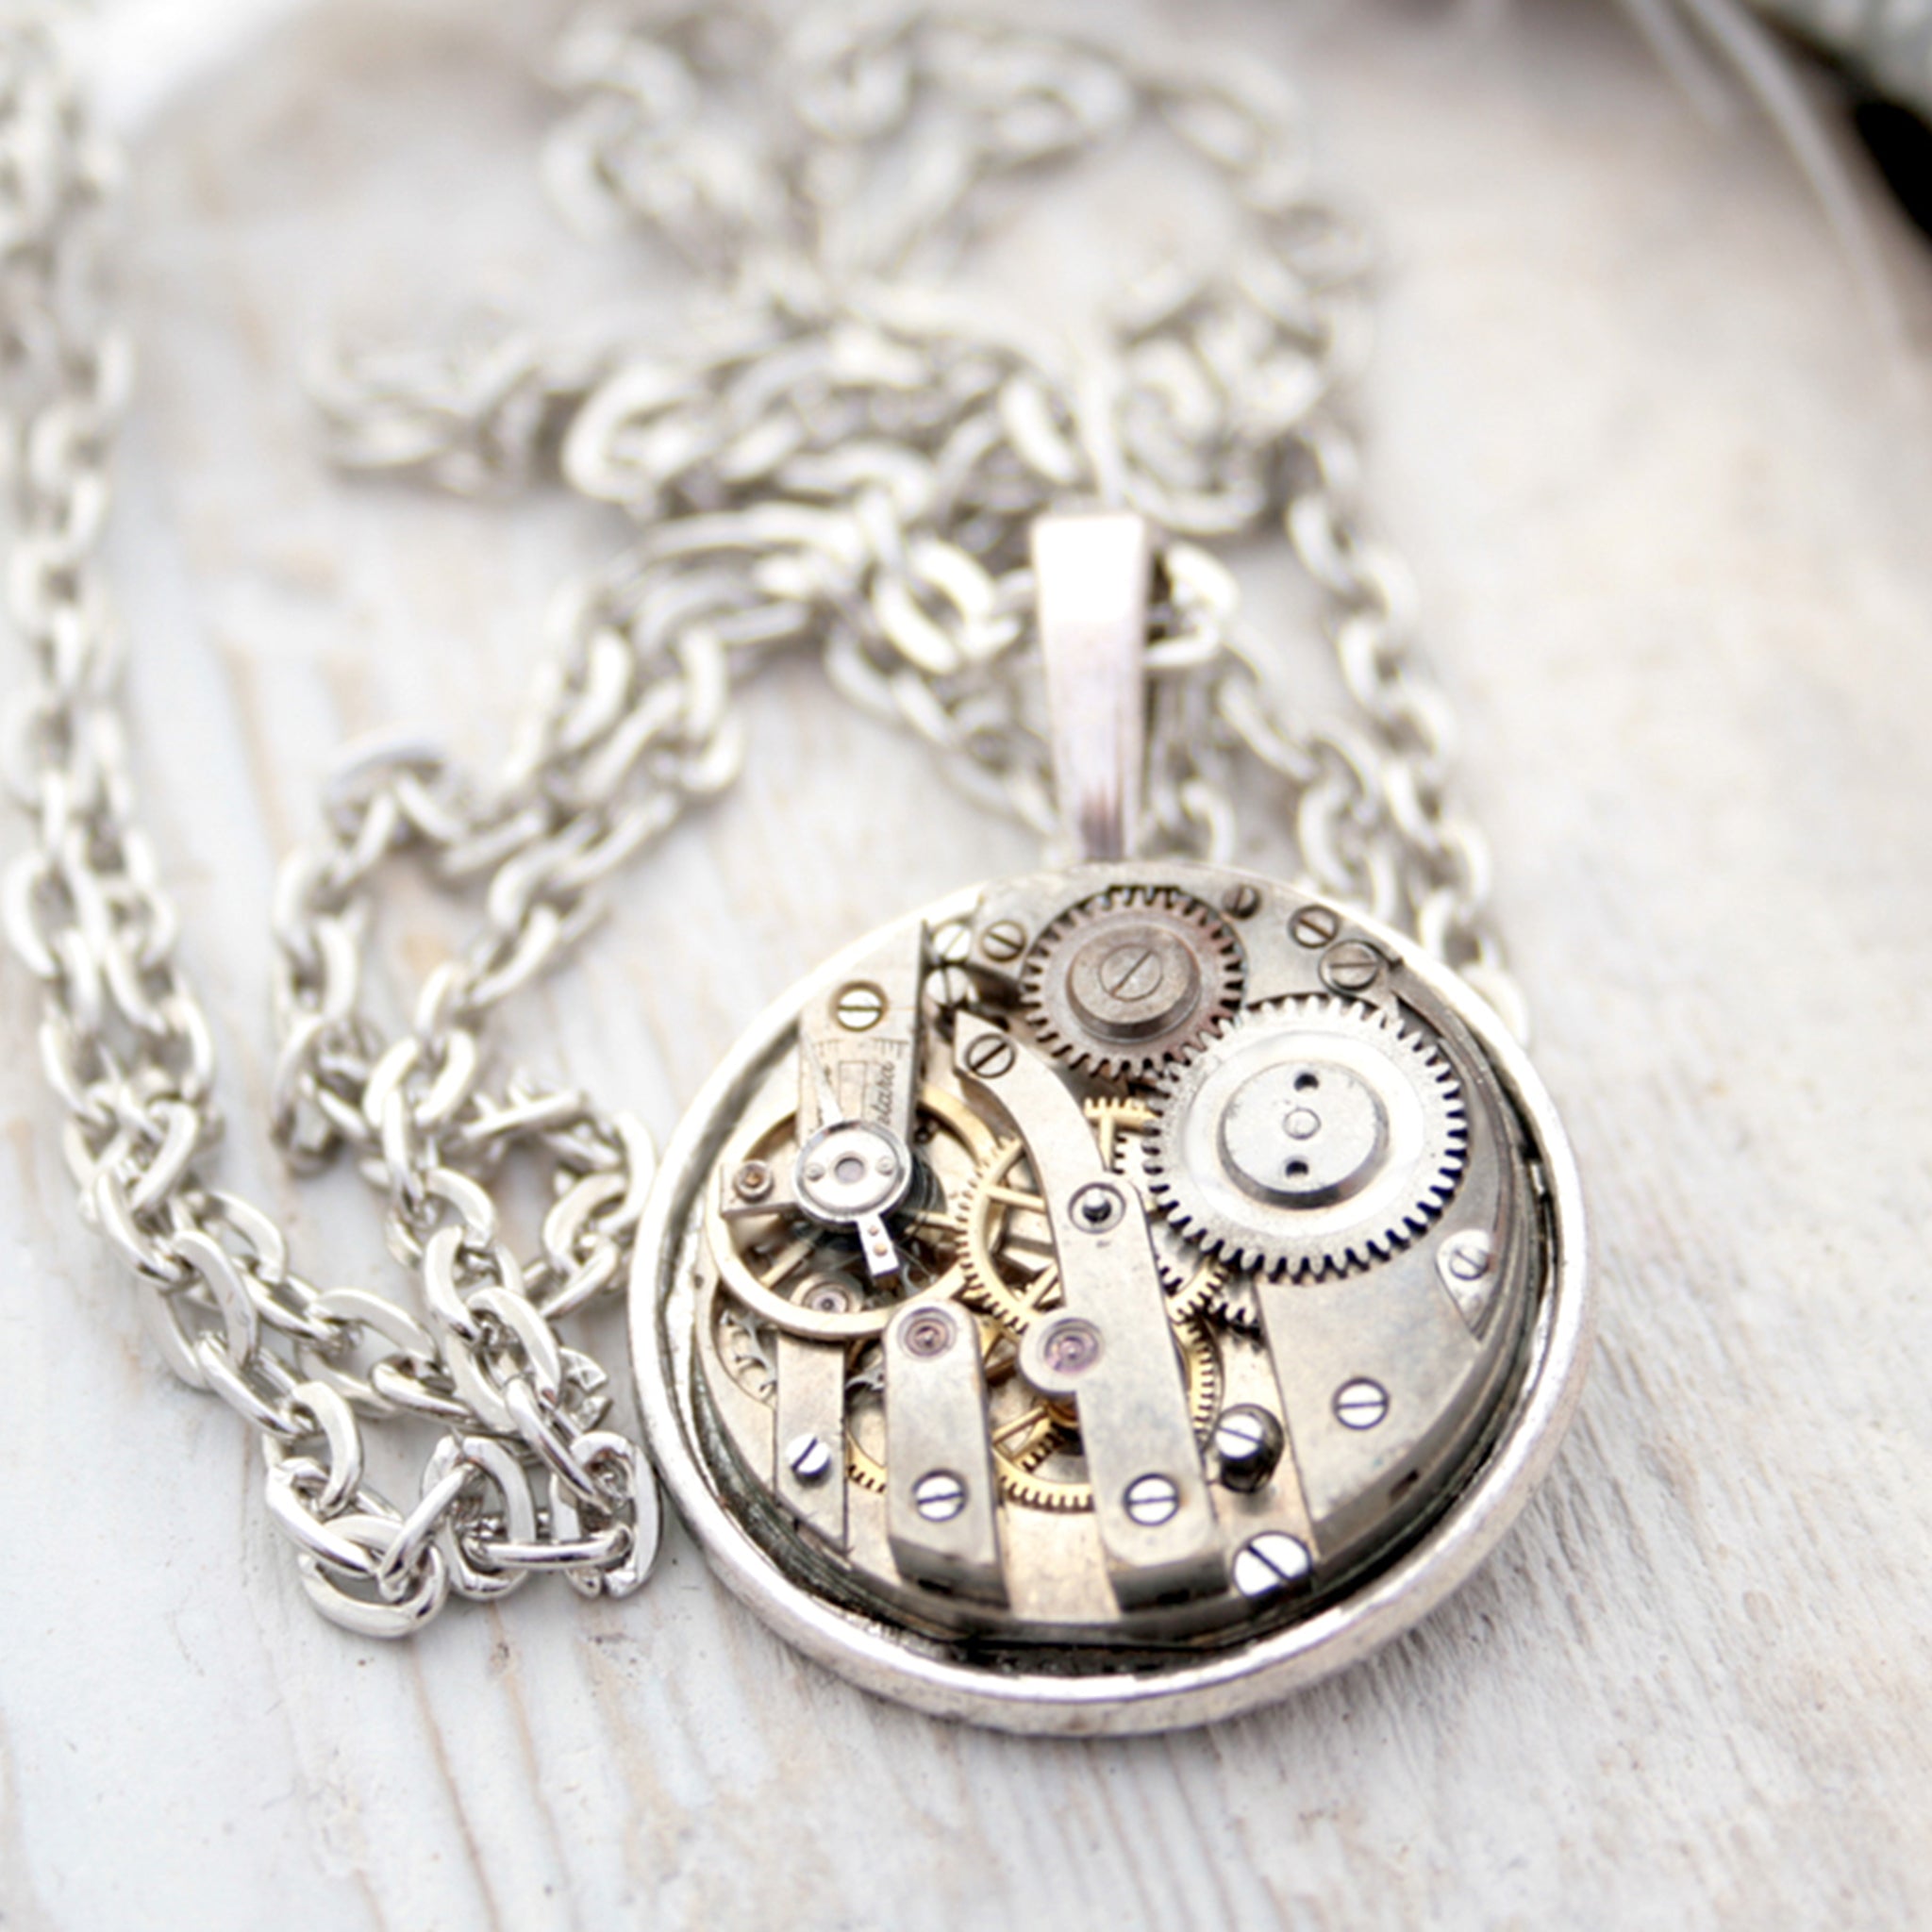 Unique Silver Pendant Necklace with Watch Mechanism in Steampunk Style